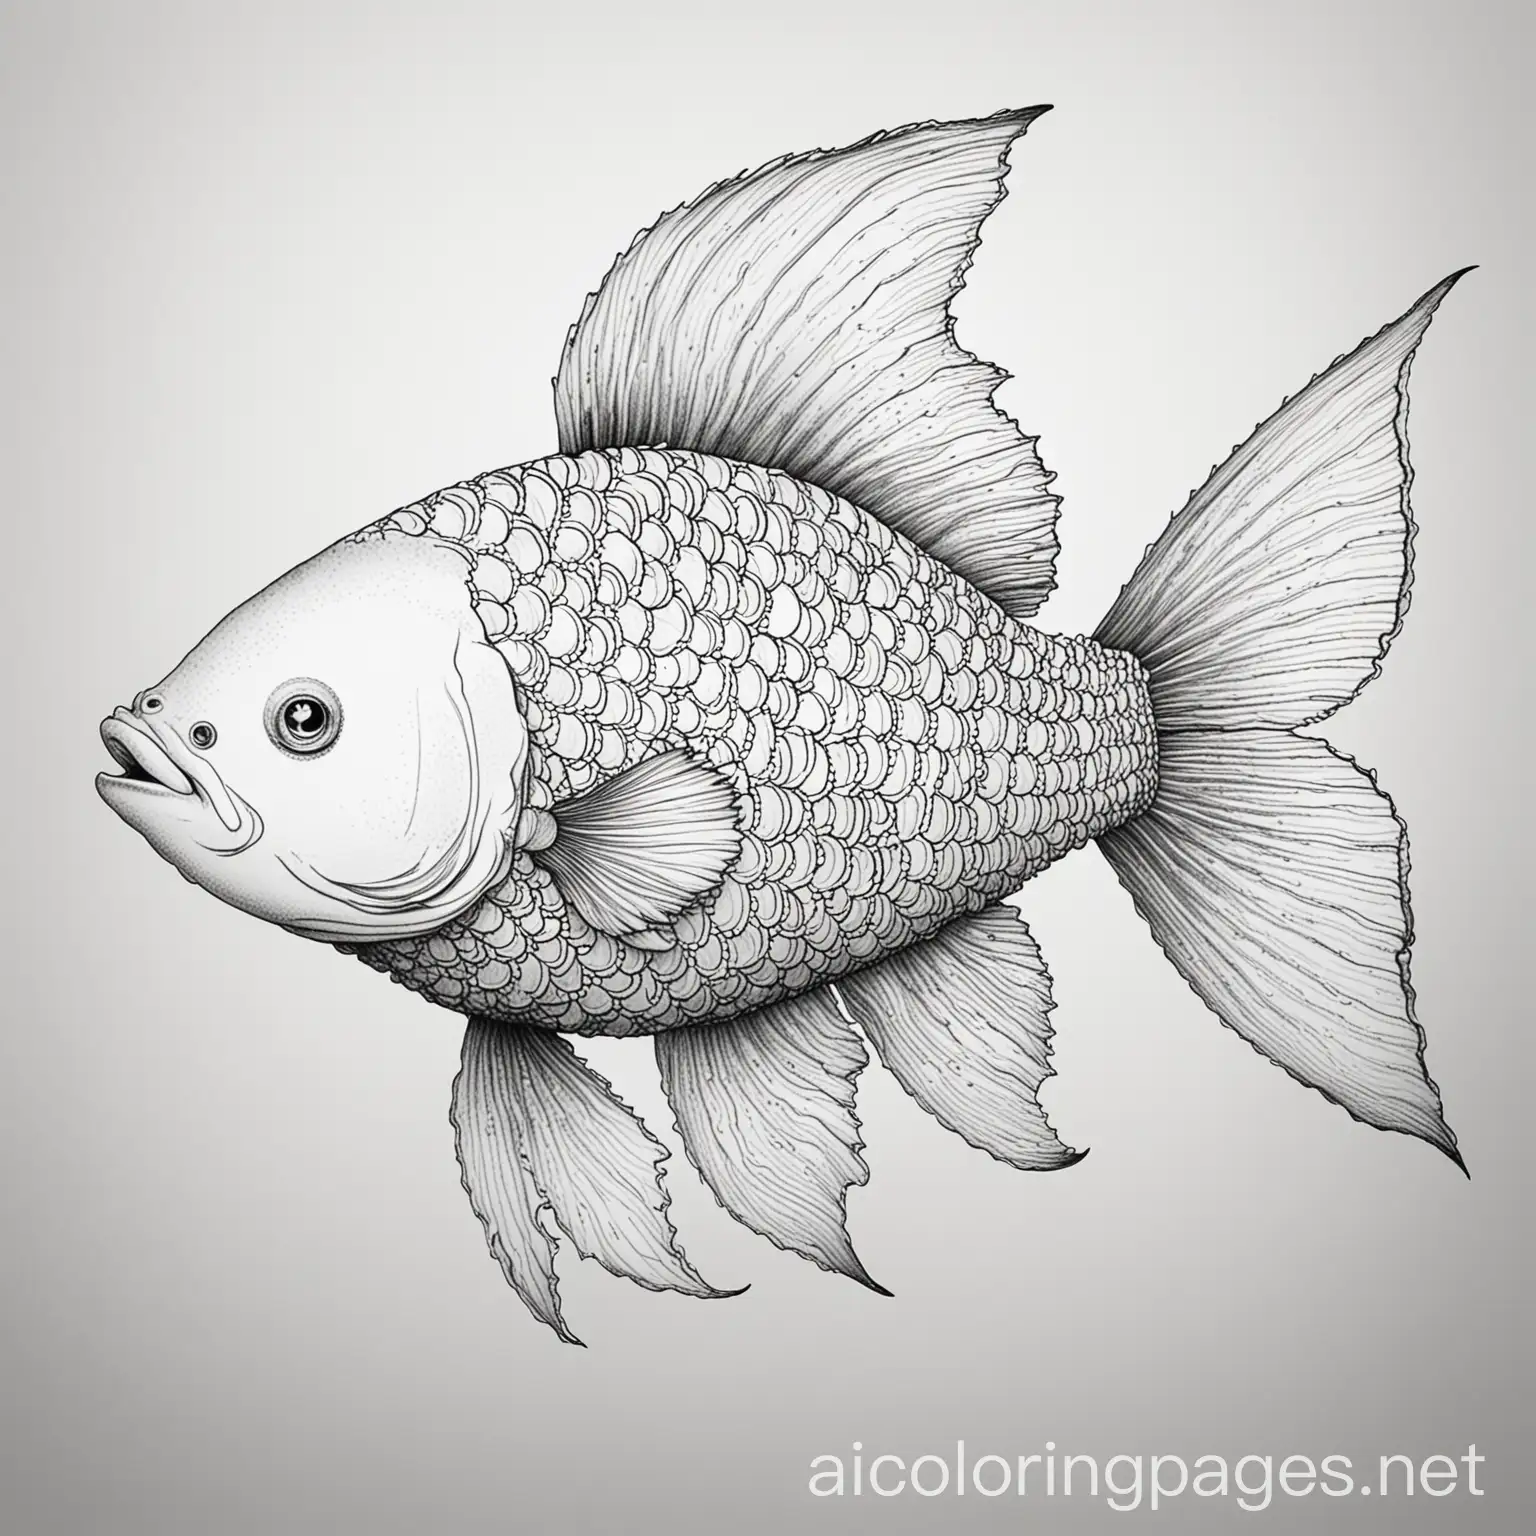 Big fish with scales and legs, Coloring Page, black and white, line art, white background, Simplicity, Ample White Space